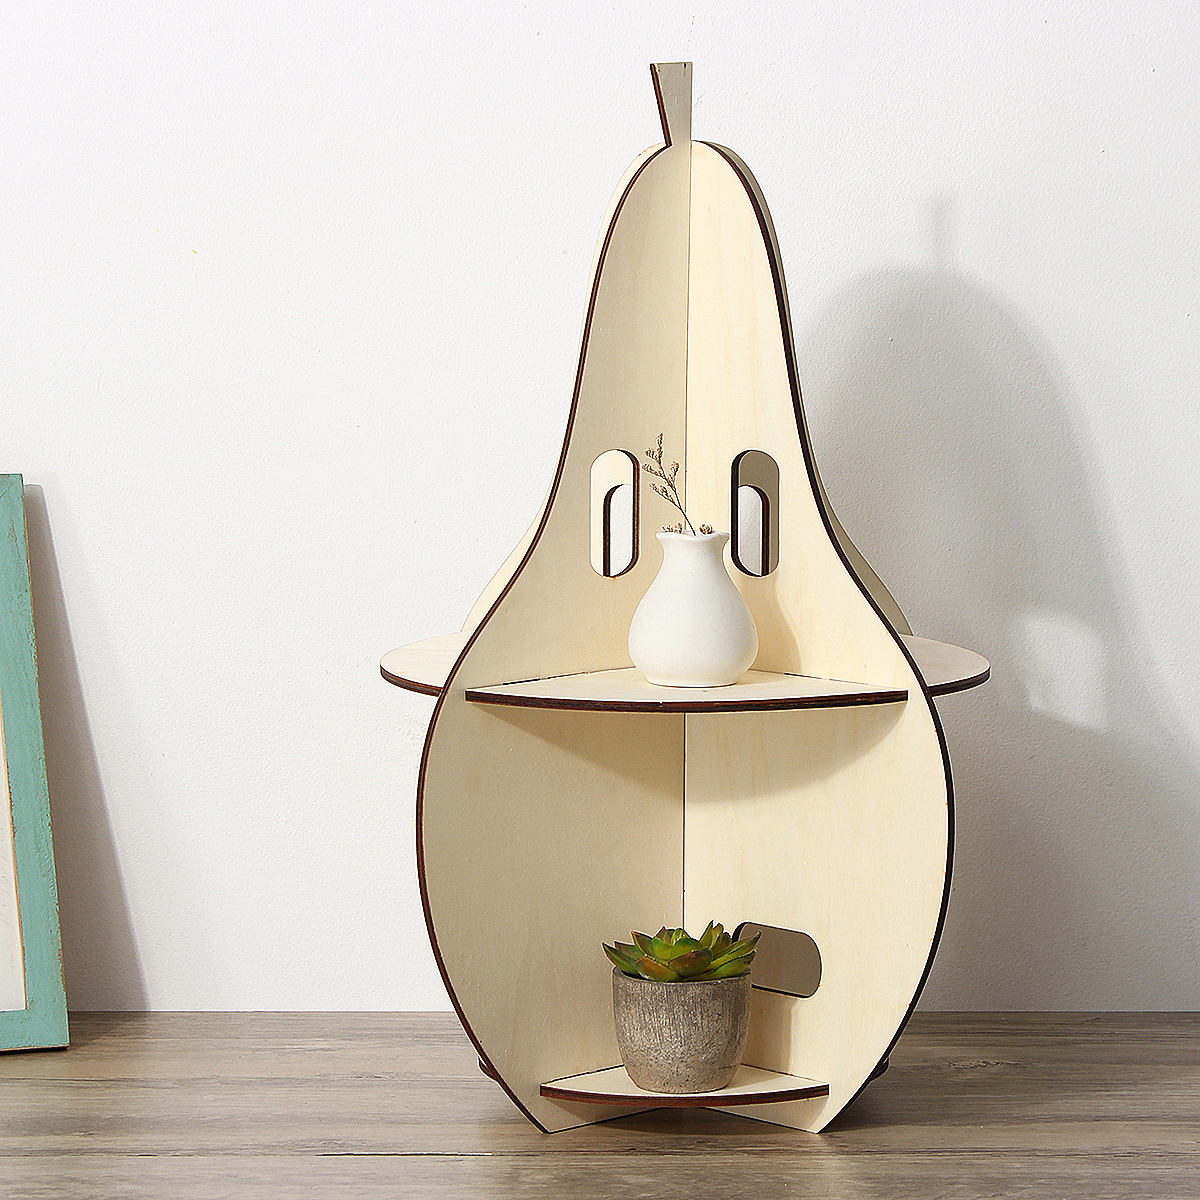 Wooden-Rack-Pear-shaped-Racks-Display-Craft-Shelf-Home-Decorations-Nordic-Style-Gift-1596581-6